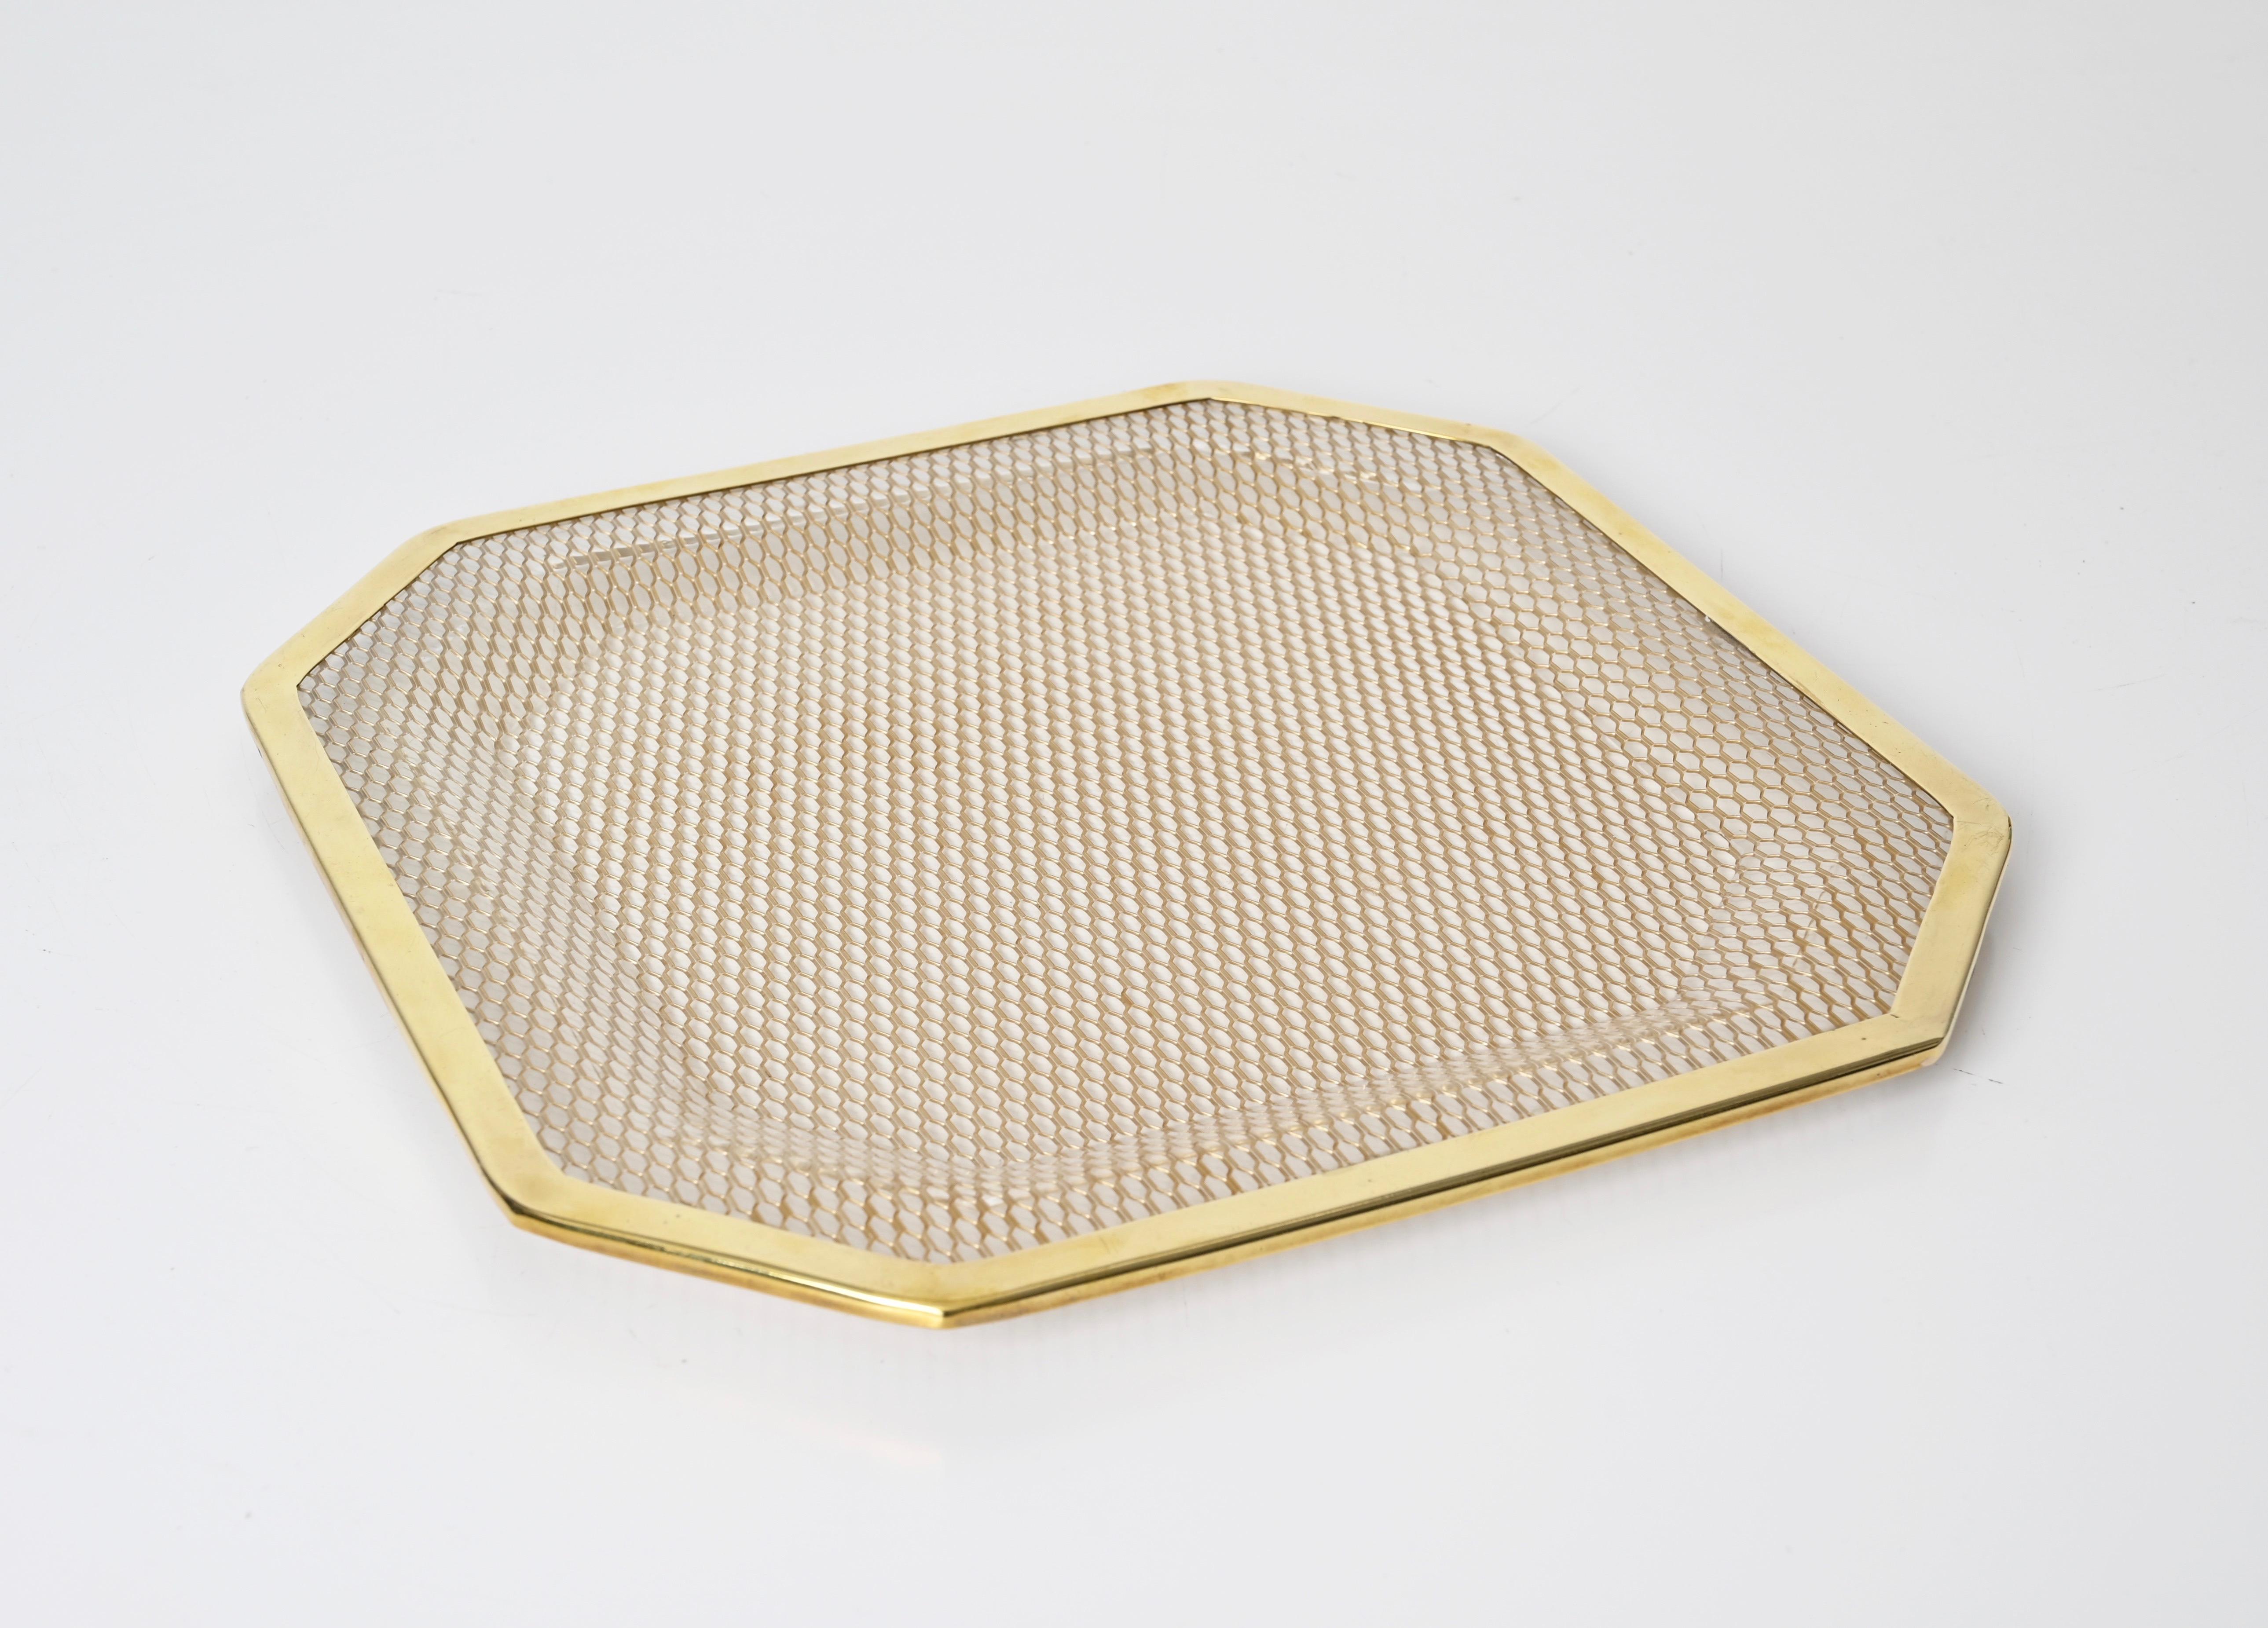 Hand-Crafted Midcentury Lucite and Brass Octagonal Italian Tray, Willy Rizzo Style, 1970s For Sale